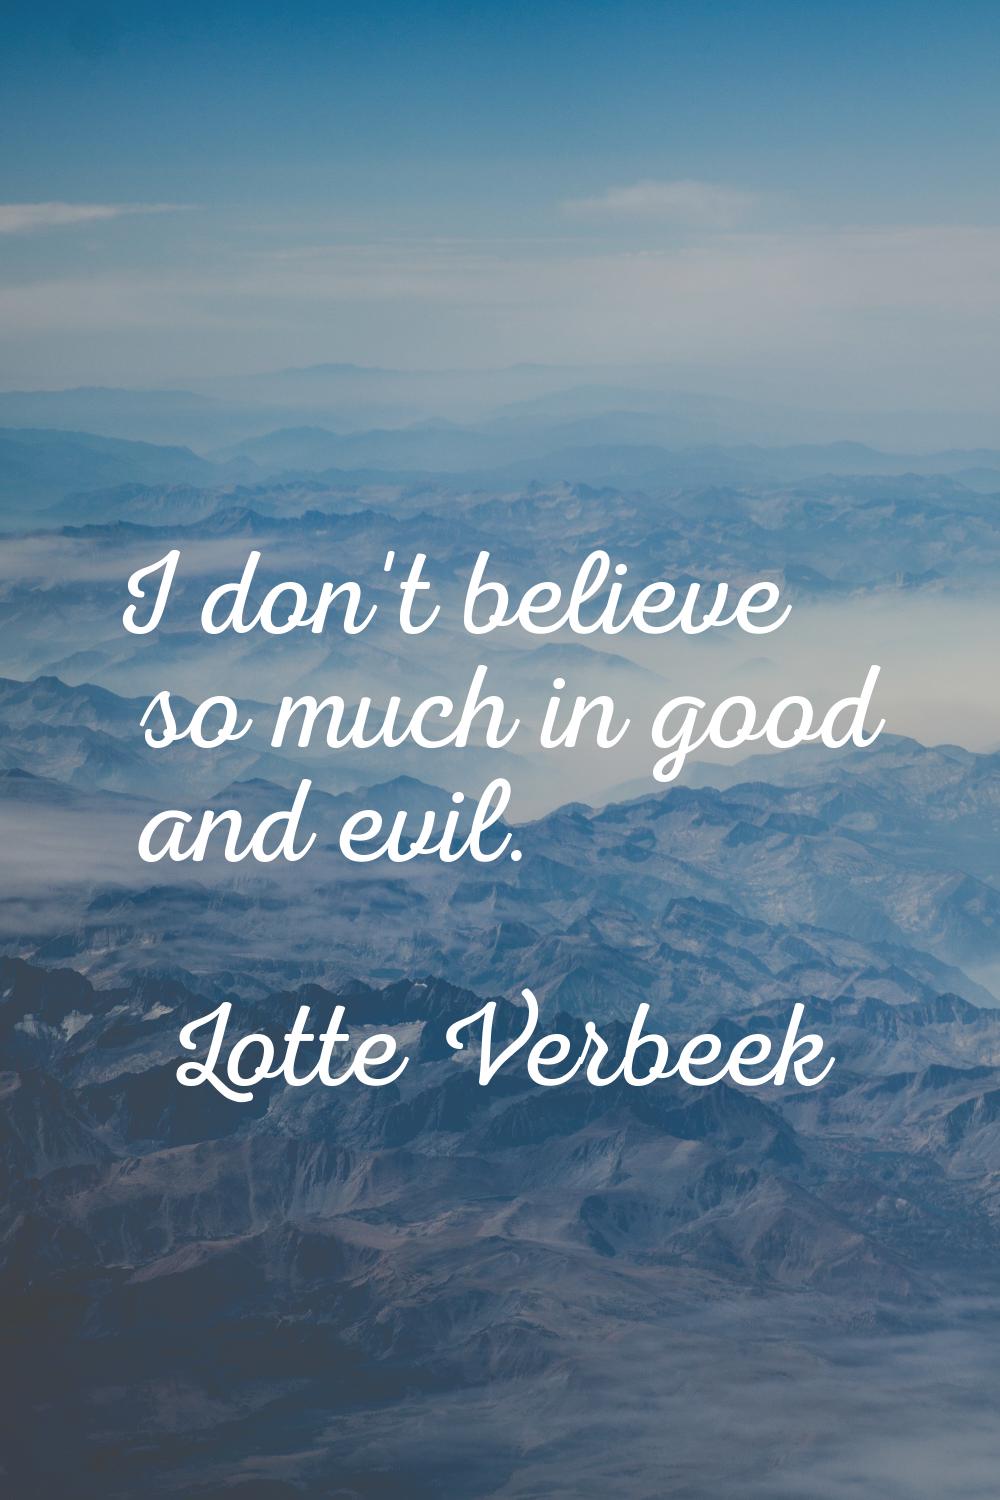 I don't believe so much in good and evil.